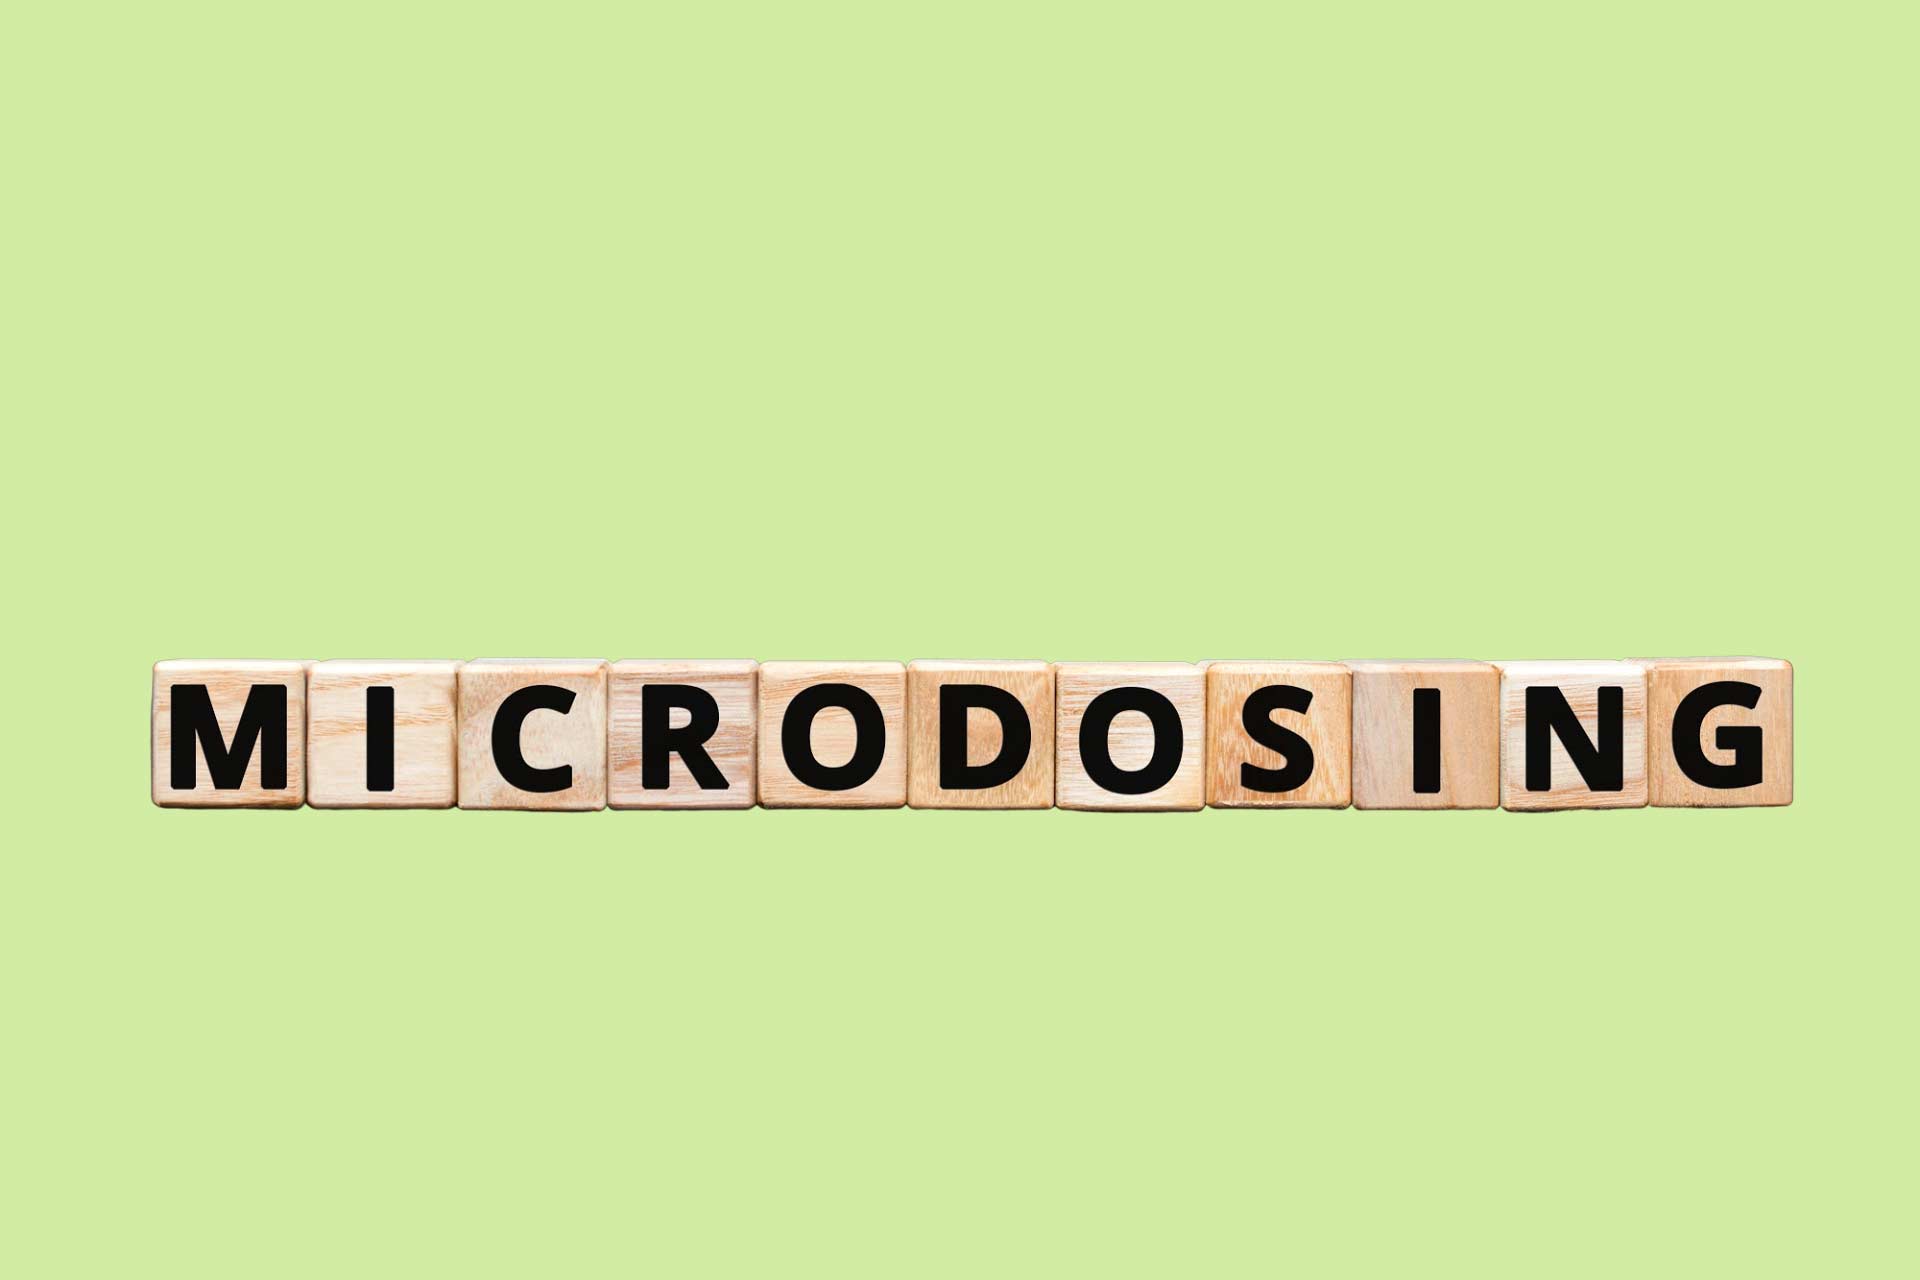 Wooden letter blocks spelling out “Microdosing” referencing microdosing THC for relief.